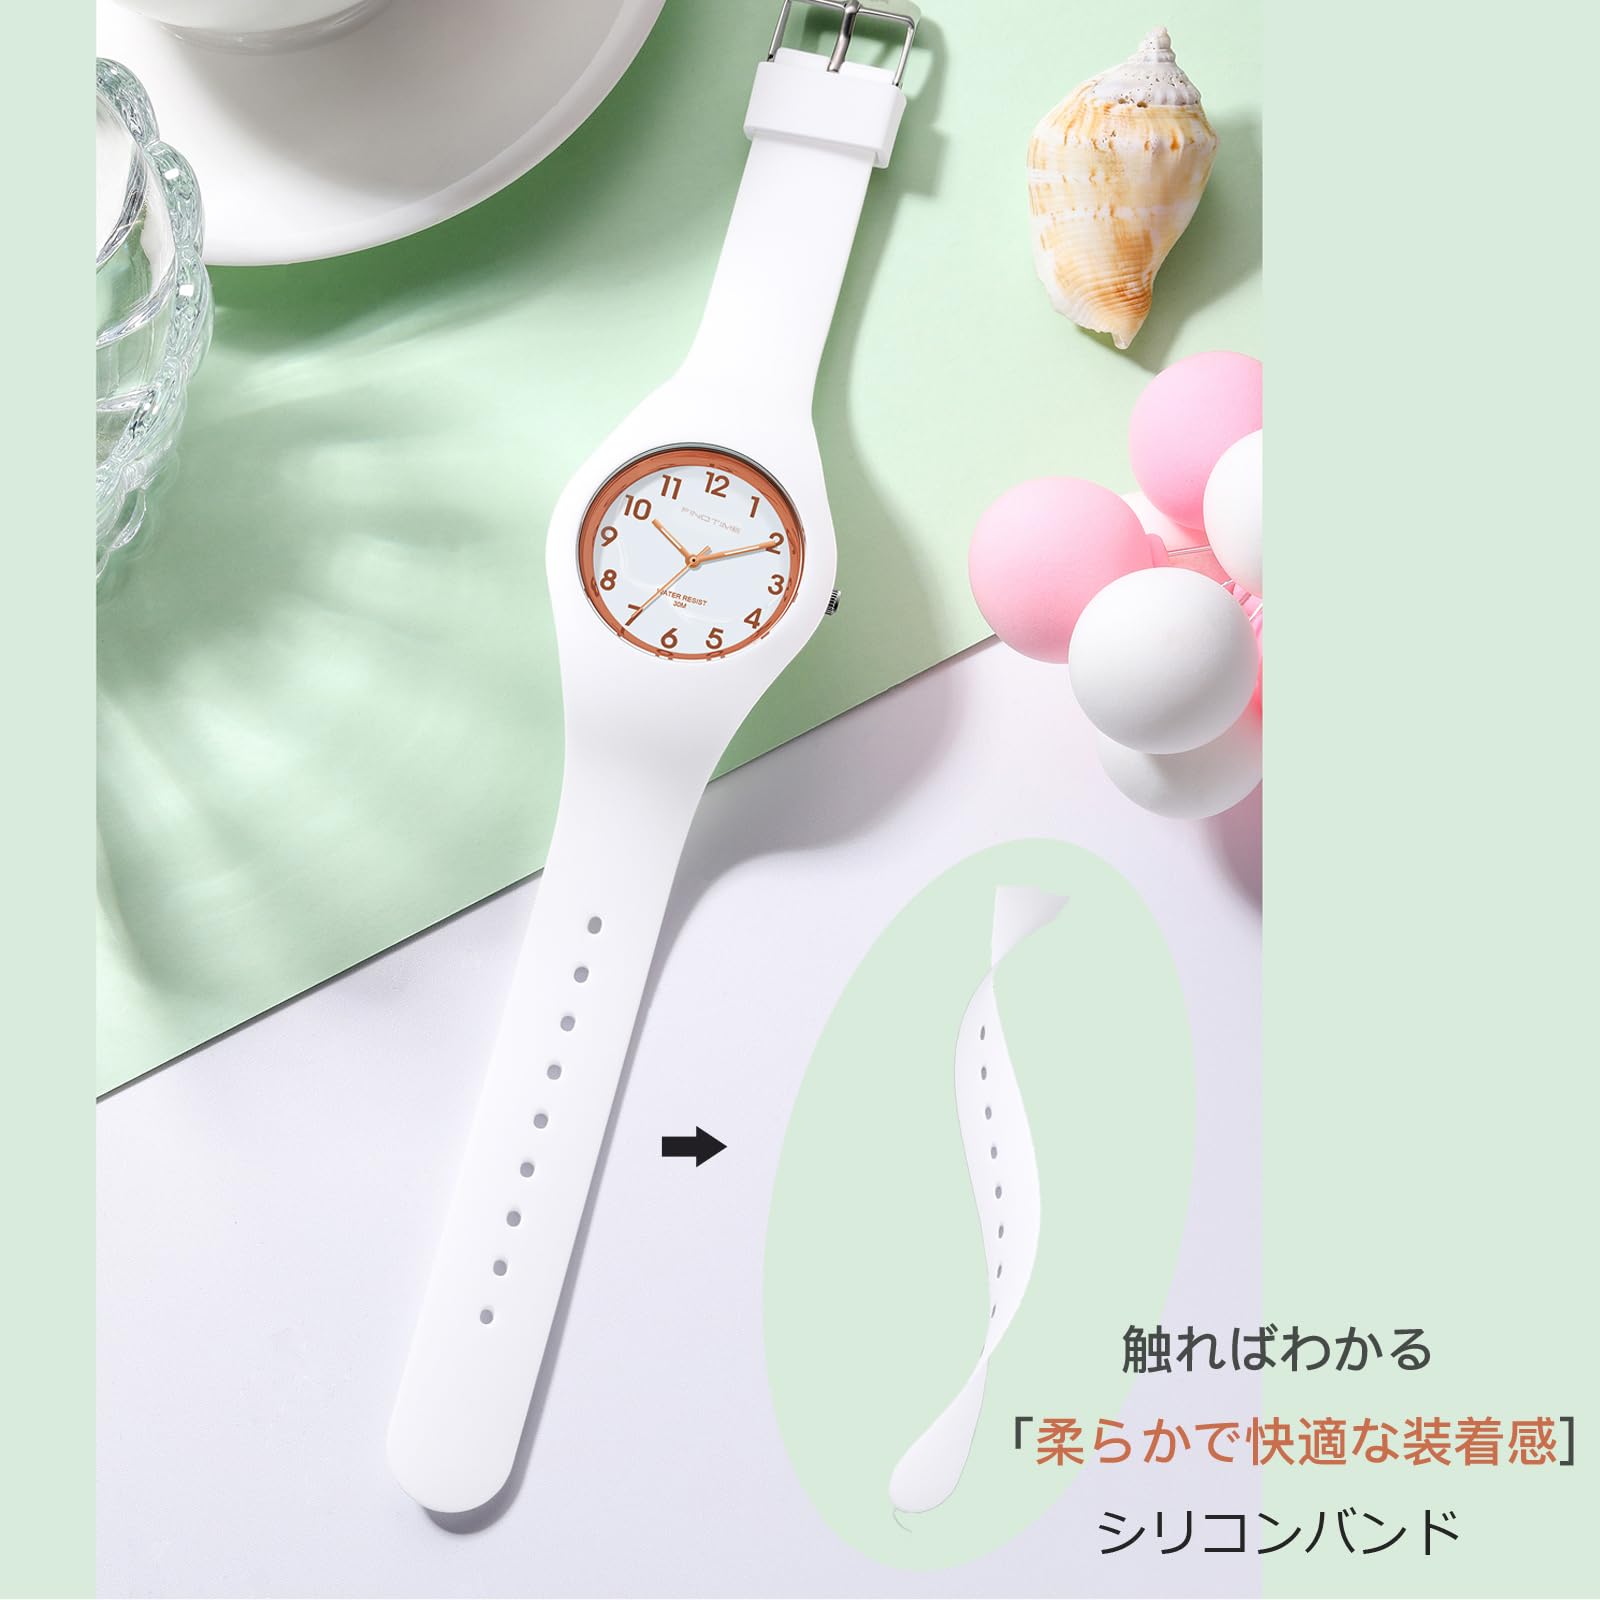 Ultra-thin watch jelly watch silicone band watch ladies unisex fashion watch wristwatch analog 30m waterproof student birthday, summer vacation, summer, thanksgiving and other holidays, wht, Simple